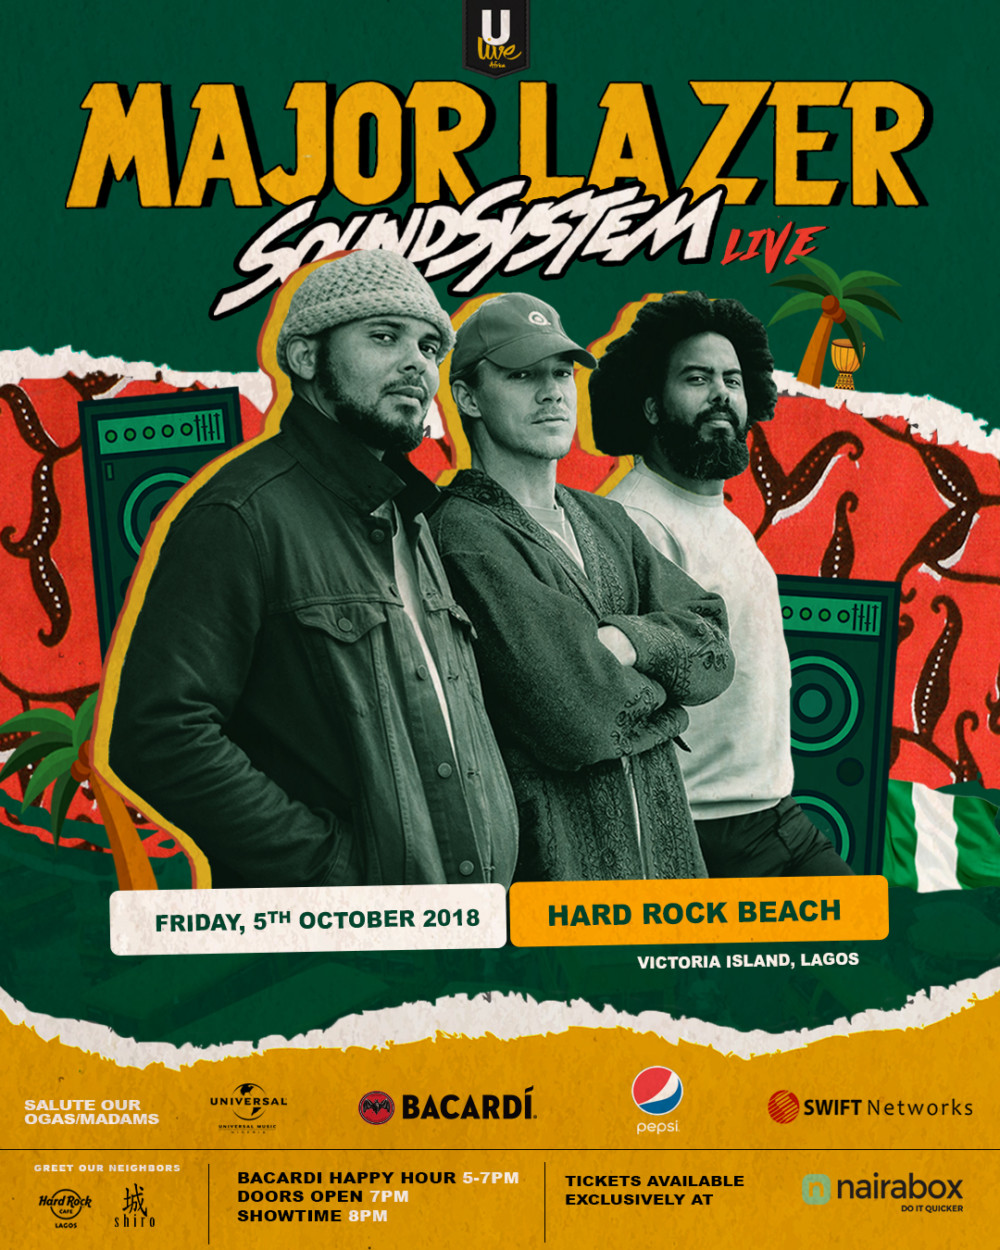 U-Live Africa set to host Major Lazer for the first time in Nigeria on  Friday, October 5th | BellaNaija